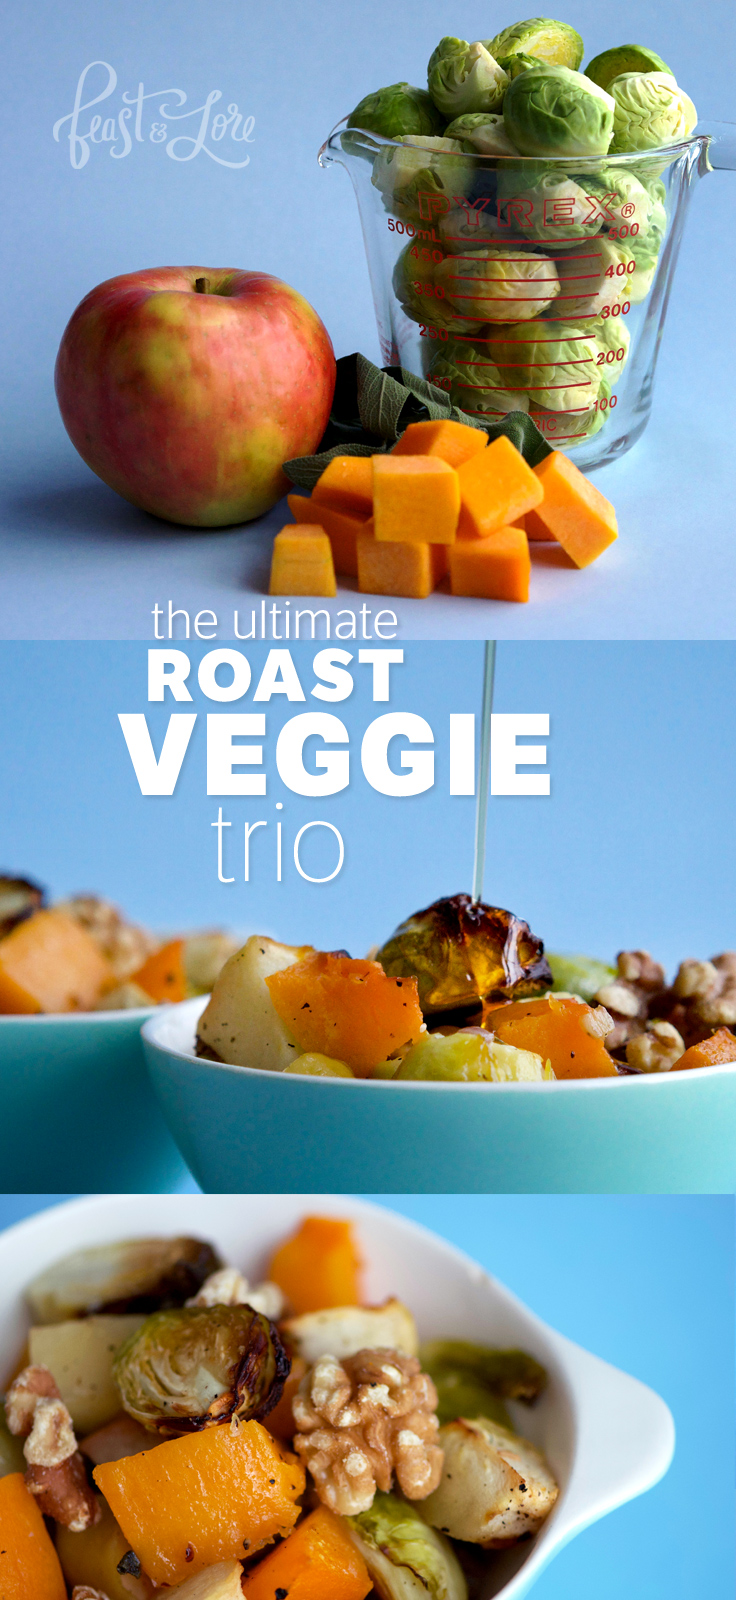 Brussels Sprouts, Butternut Squash and Apples, the perfect trio of vegetables